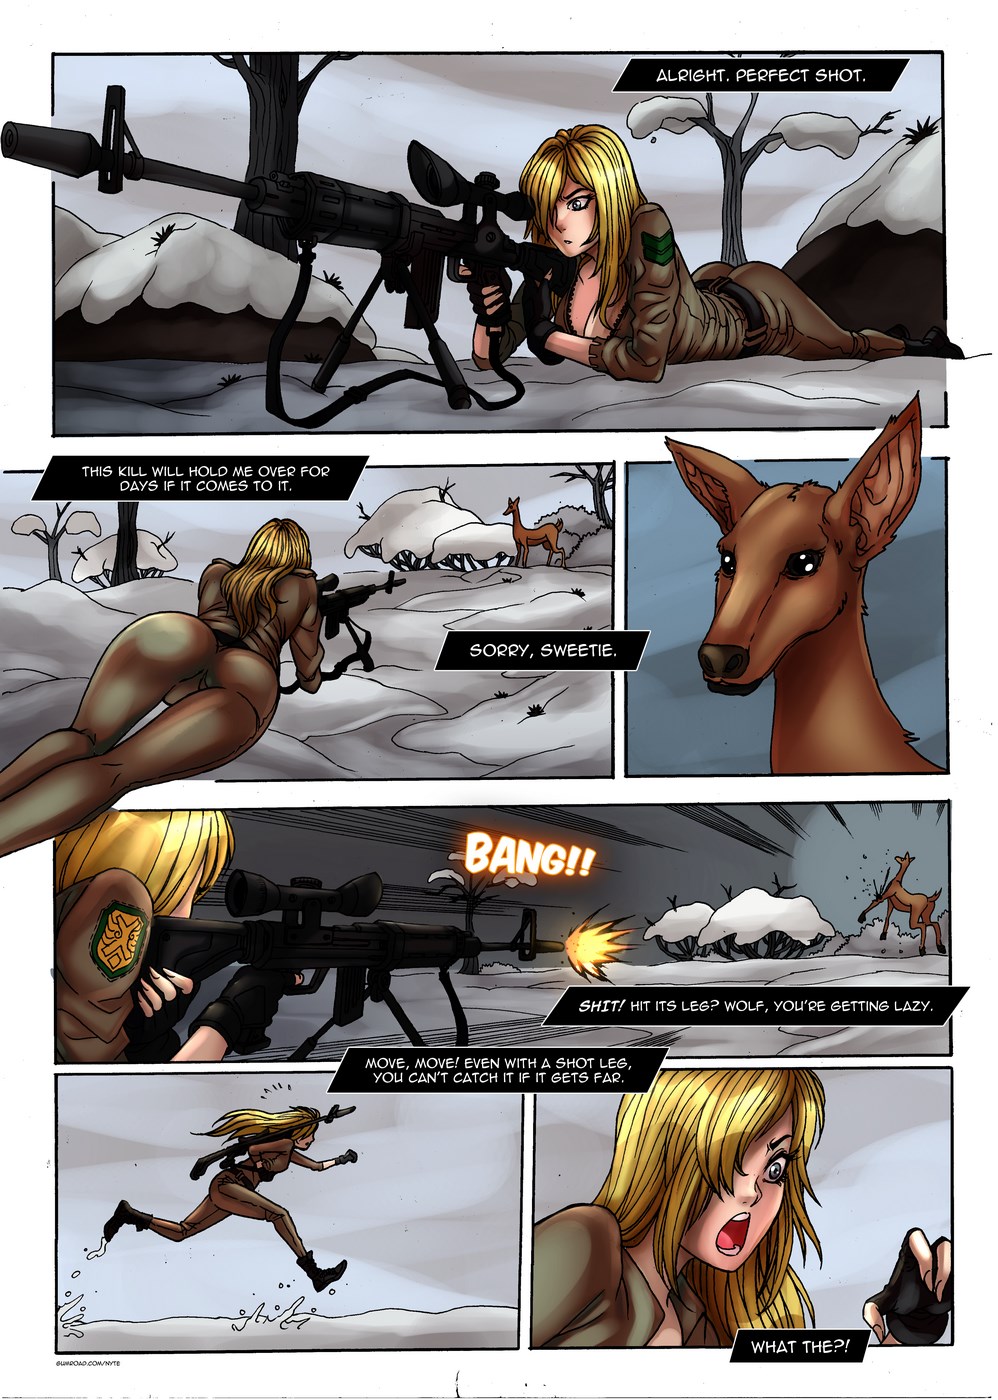 Sniper Wolf’s Lullaby- Nyte.